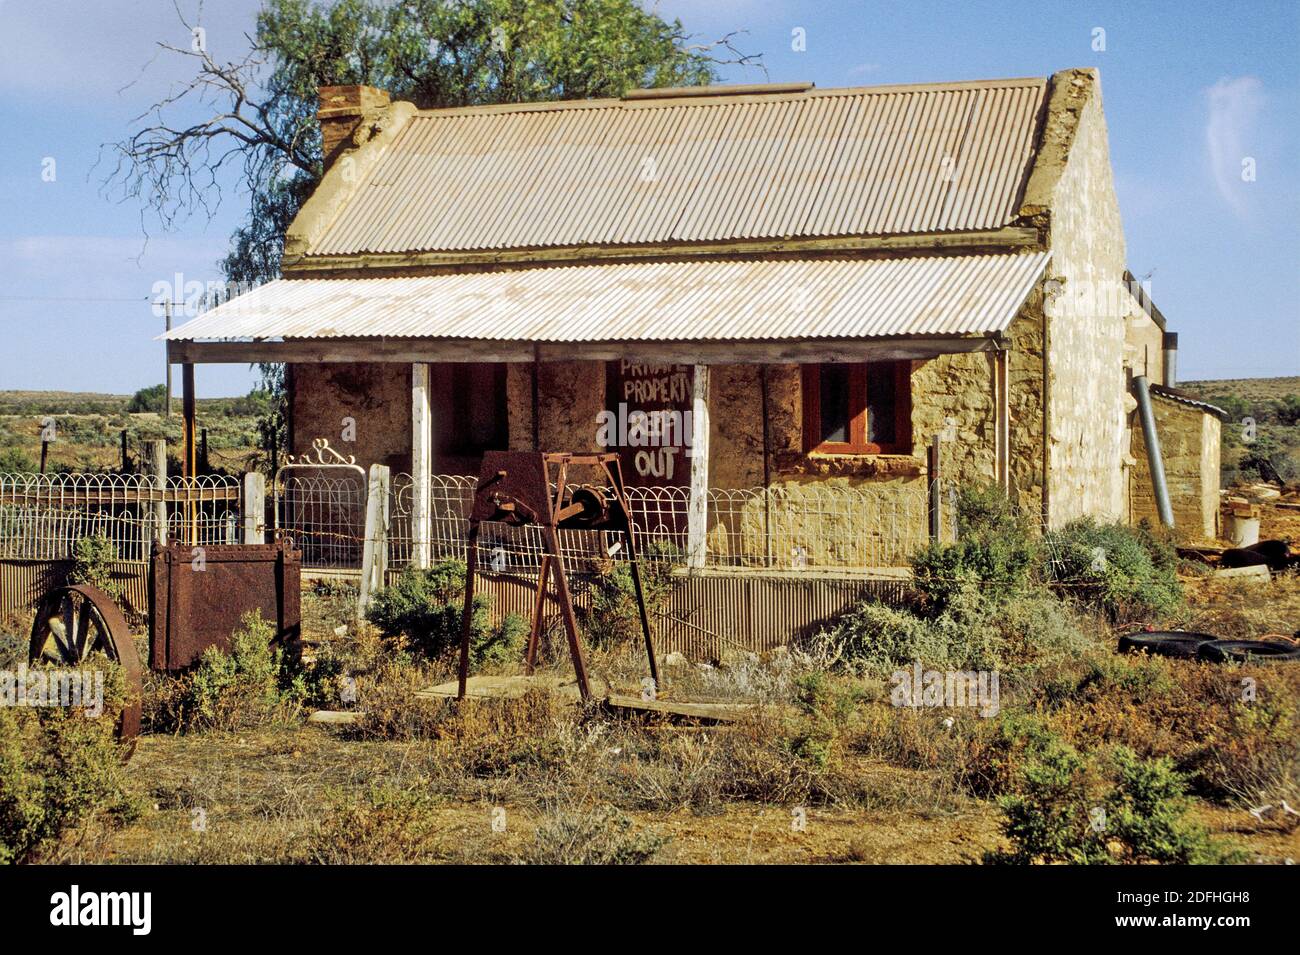 High noon on main street... Cottage in the former mining township of Silverton, near Broken Hill, NSW.  Silverton is known as the location chosen for many Australian movies including Wake in Fright, Mad Max 2, A Town Like Alice, Hostage, Razorback, Journey into Darkness, Dirty Deeds, The Craic and Golden Soak. Stock Photo